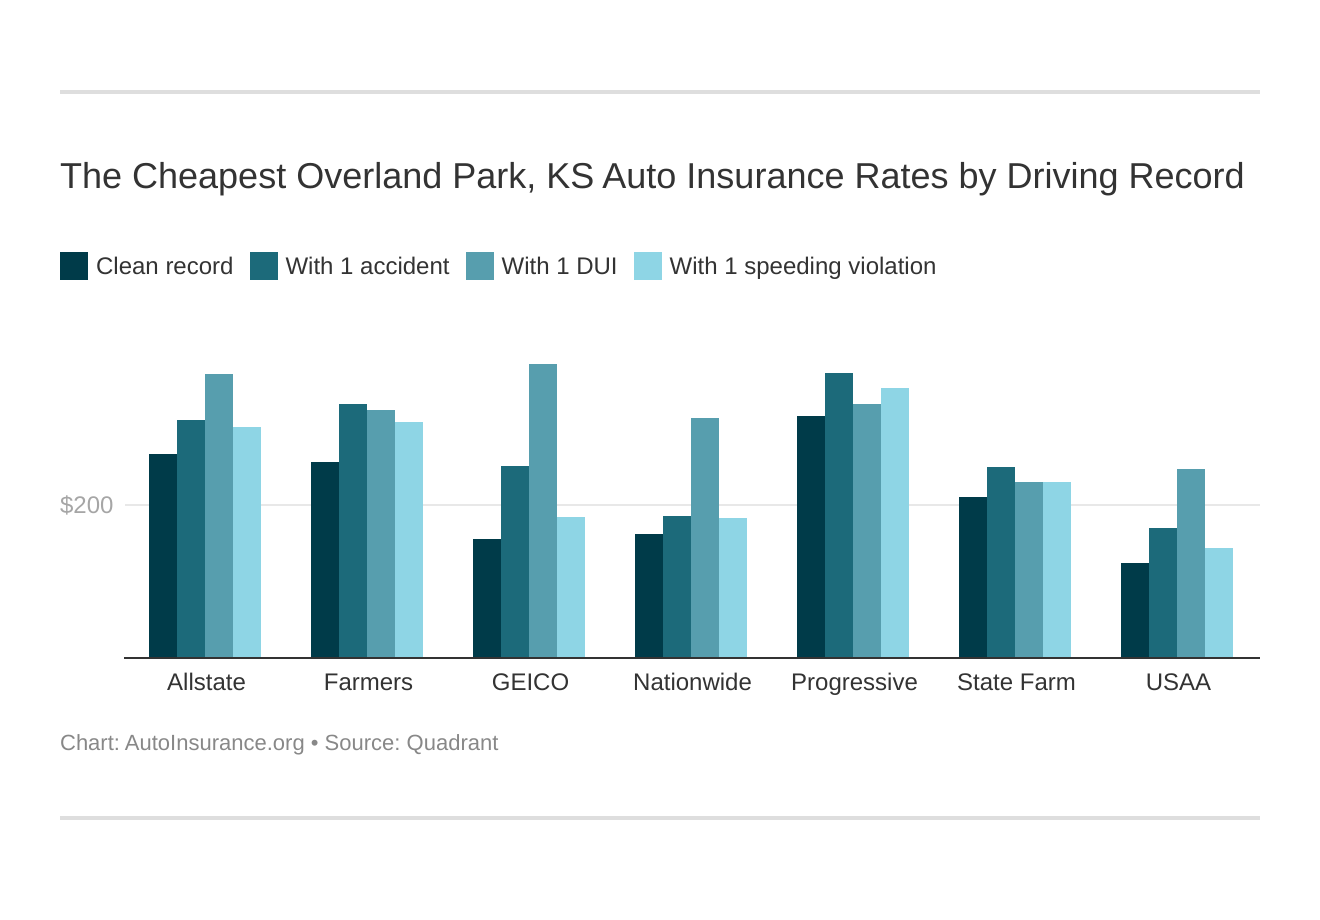 The Cheapest Overland Park, KS Auto Insurance Rates by Driving Record